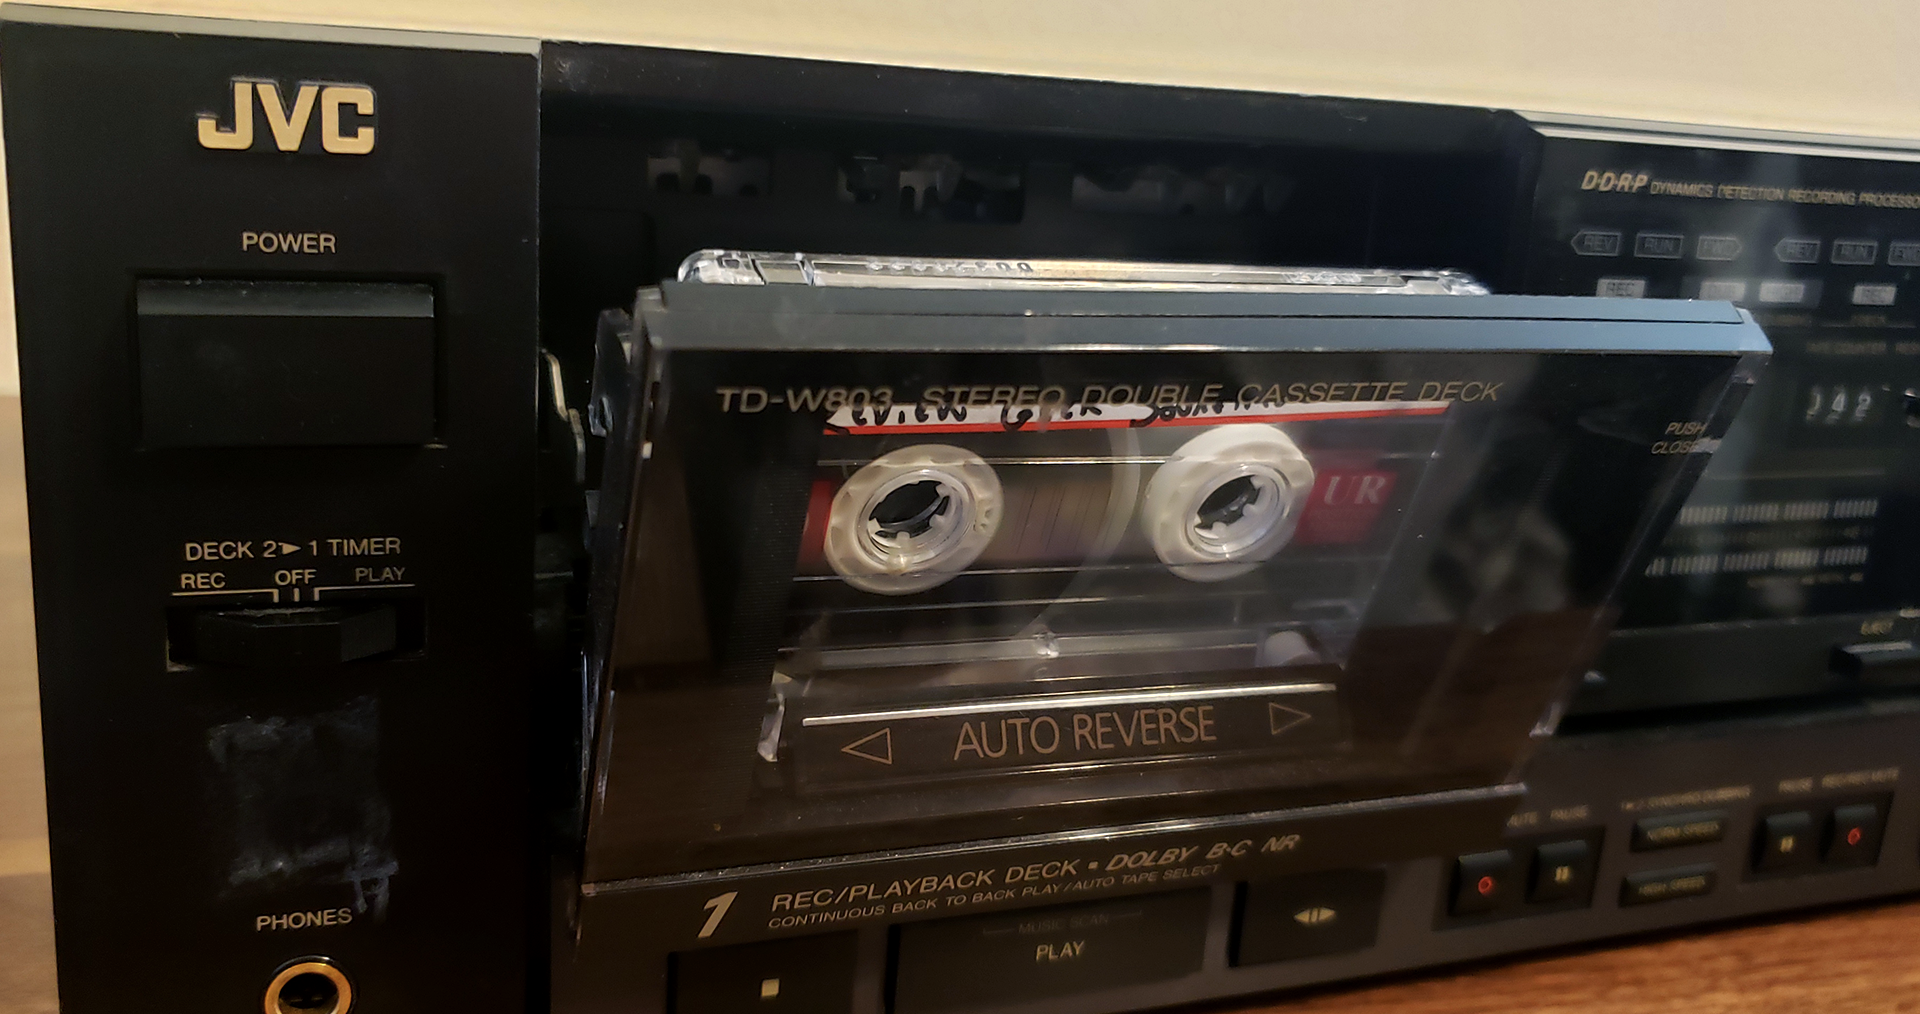 The Review Geek soundtrack cassette tape in a JVC tape deck.